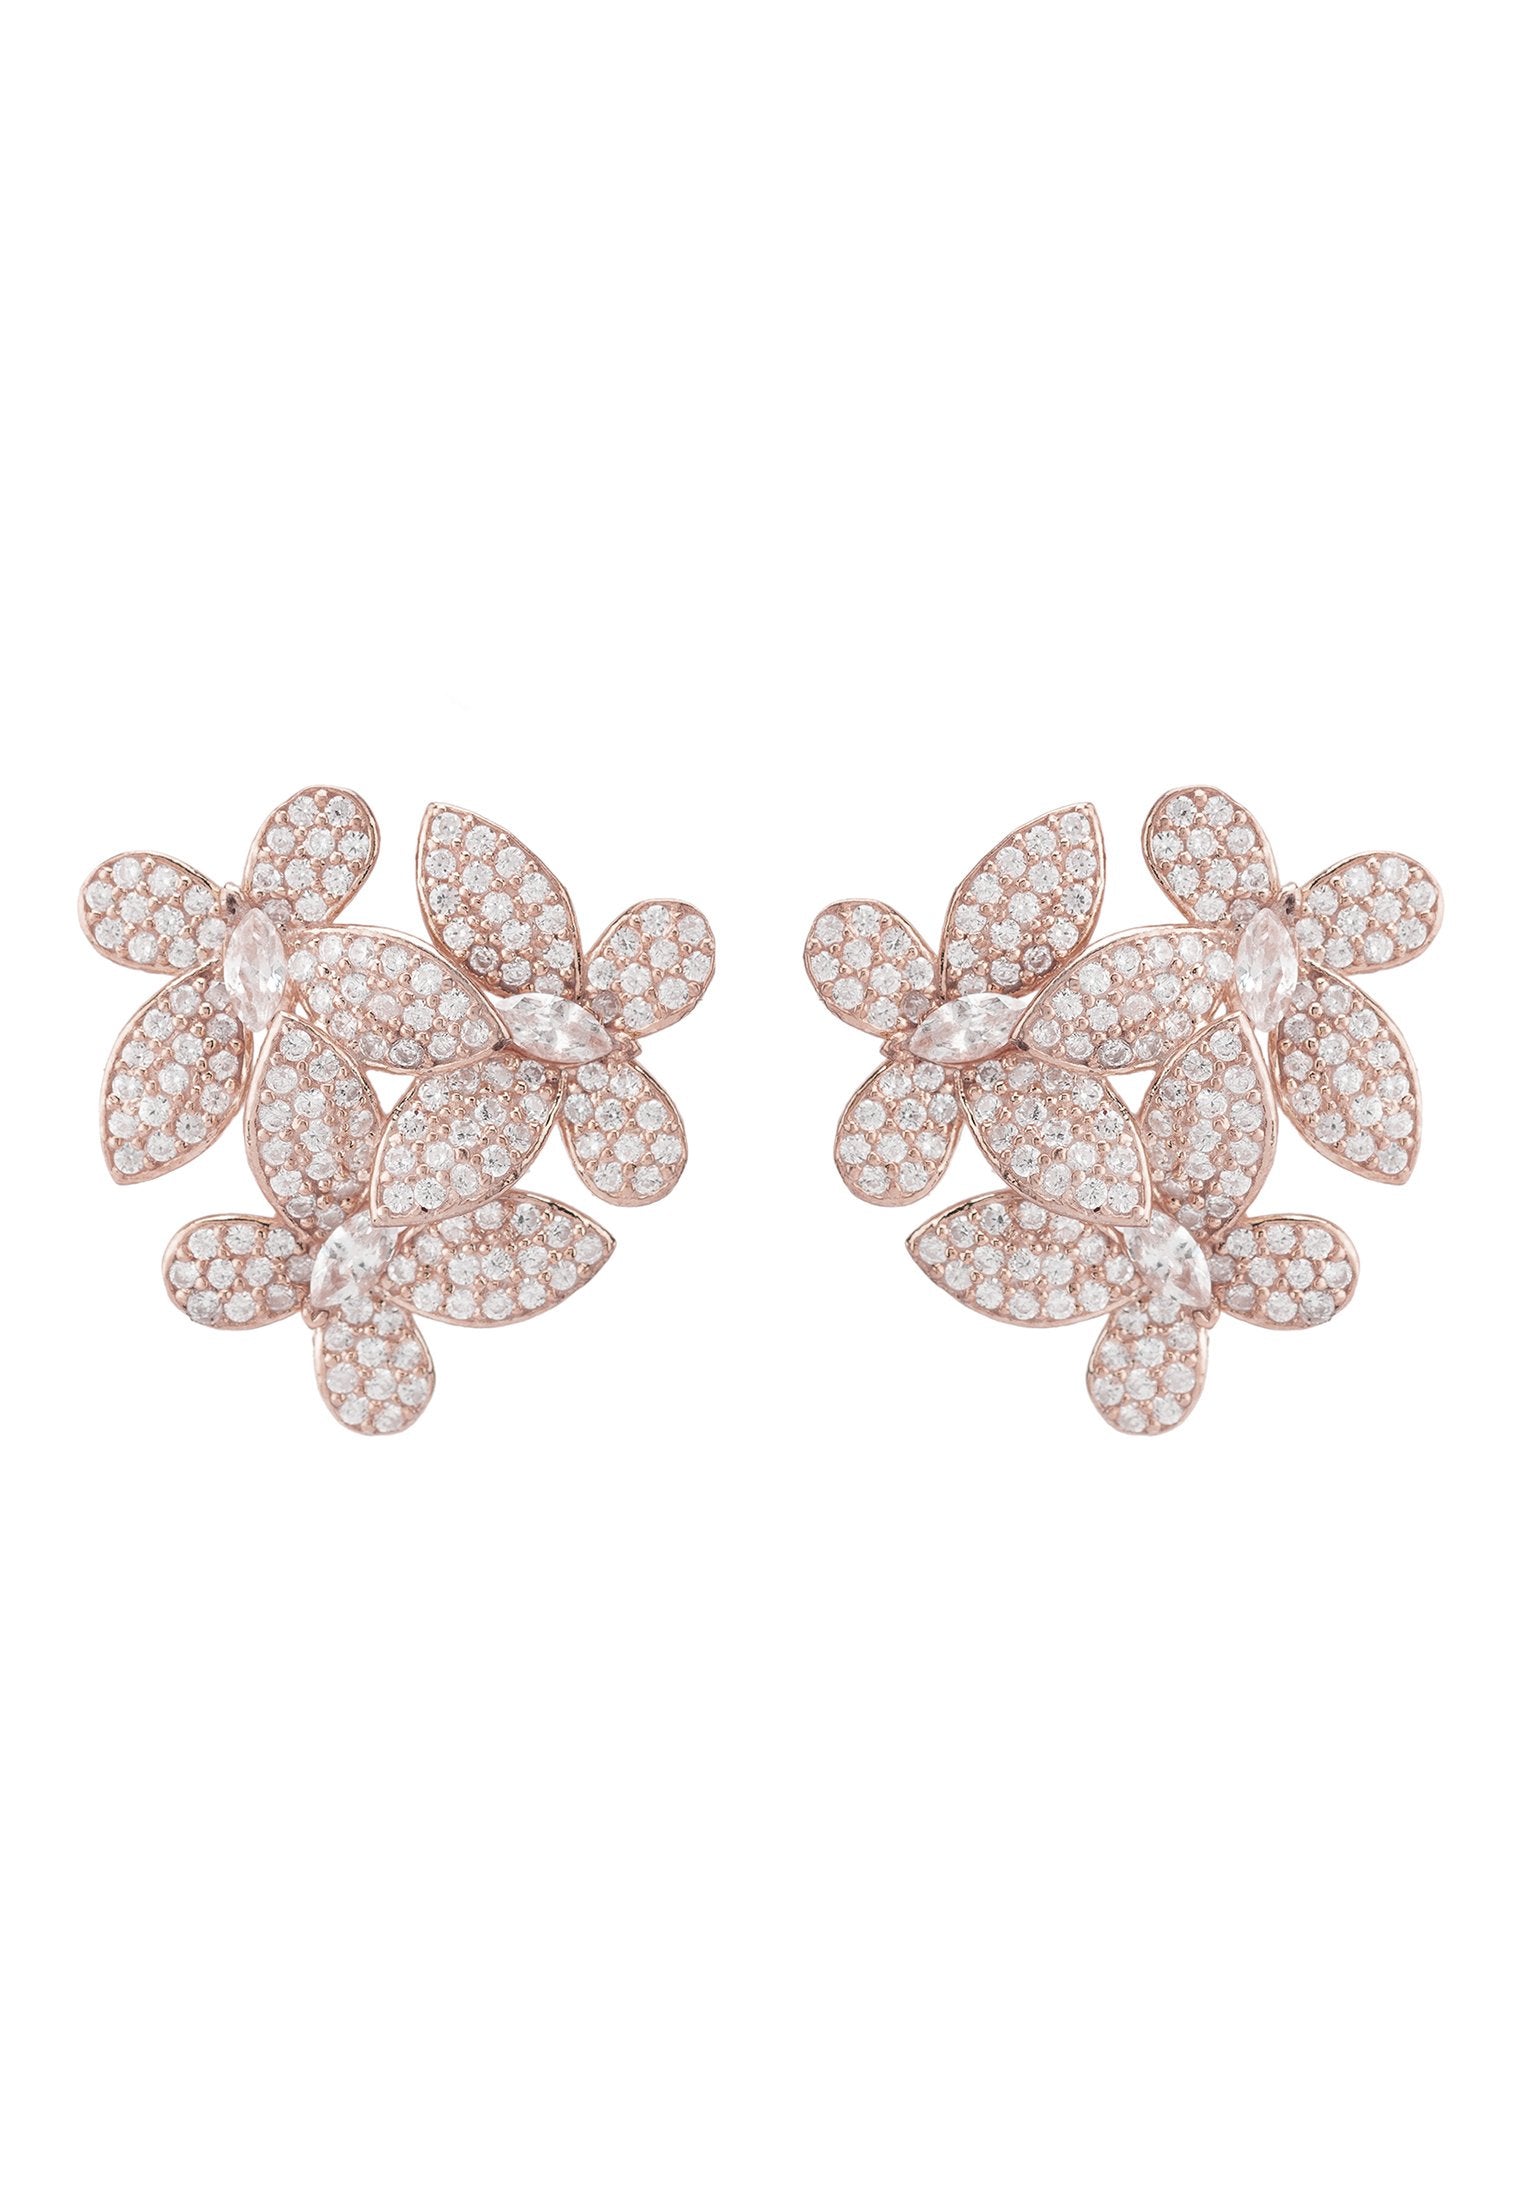 Rosegold Floral Stud Earrings with Cubic Zirconia - Nature-Inspired Jewelry for Bridal and Evening Wear - Jewelry & Watches - Bijou Her -  -  - 